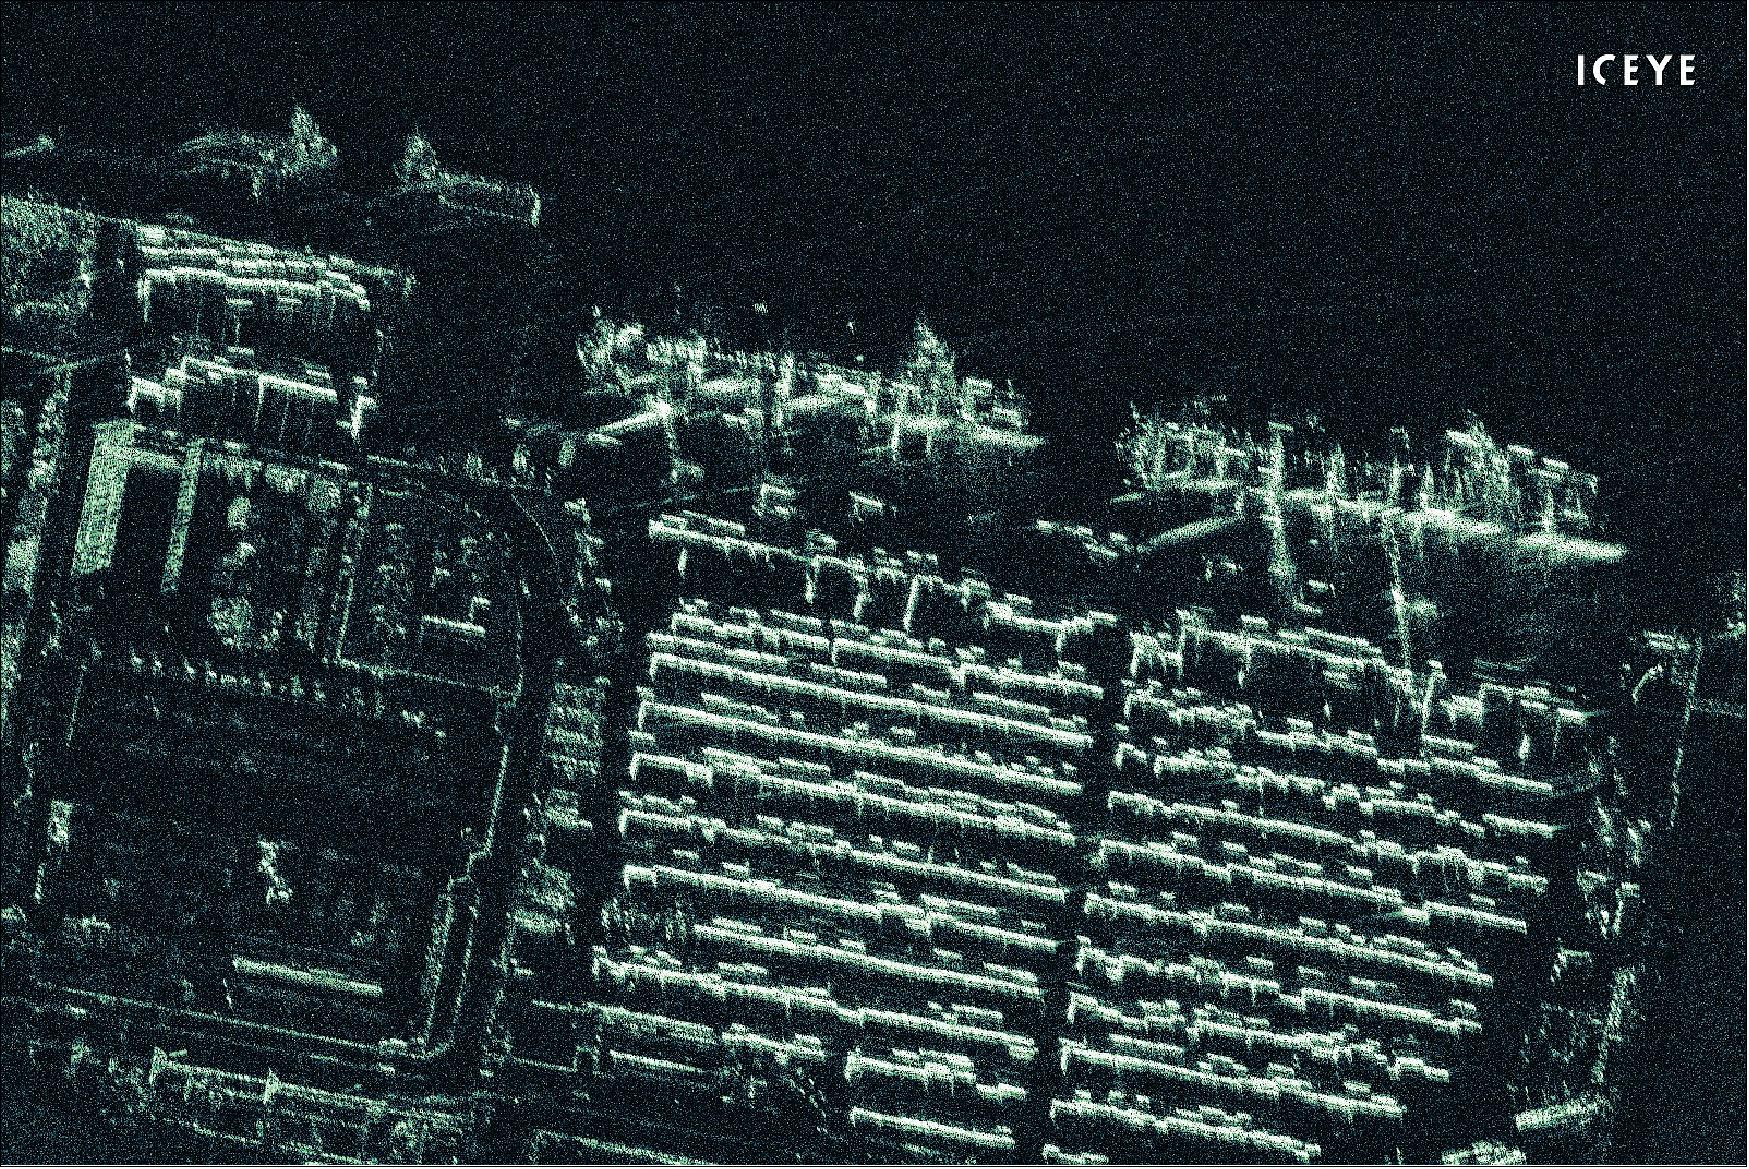 Figure 50: ICEYE radar satellite imagery that has been acquired and processed at 0.5 meter ground sample distance, featuring a port container terminal near Port Harcourt, Nigeria (image credit: ICEYE)